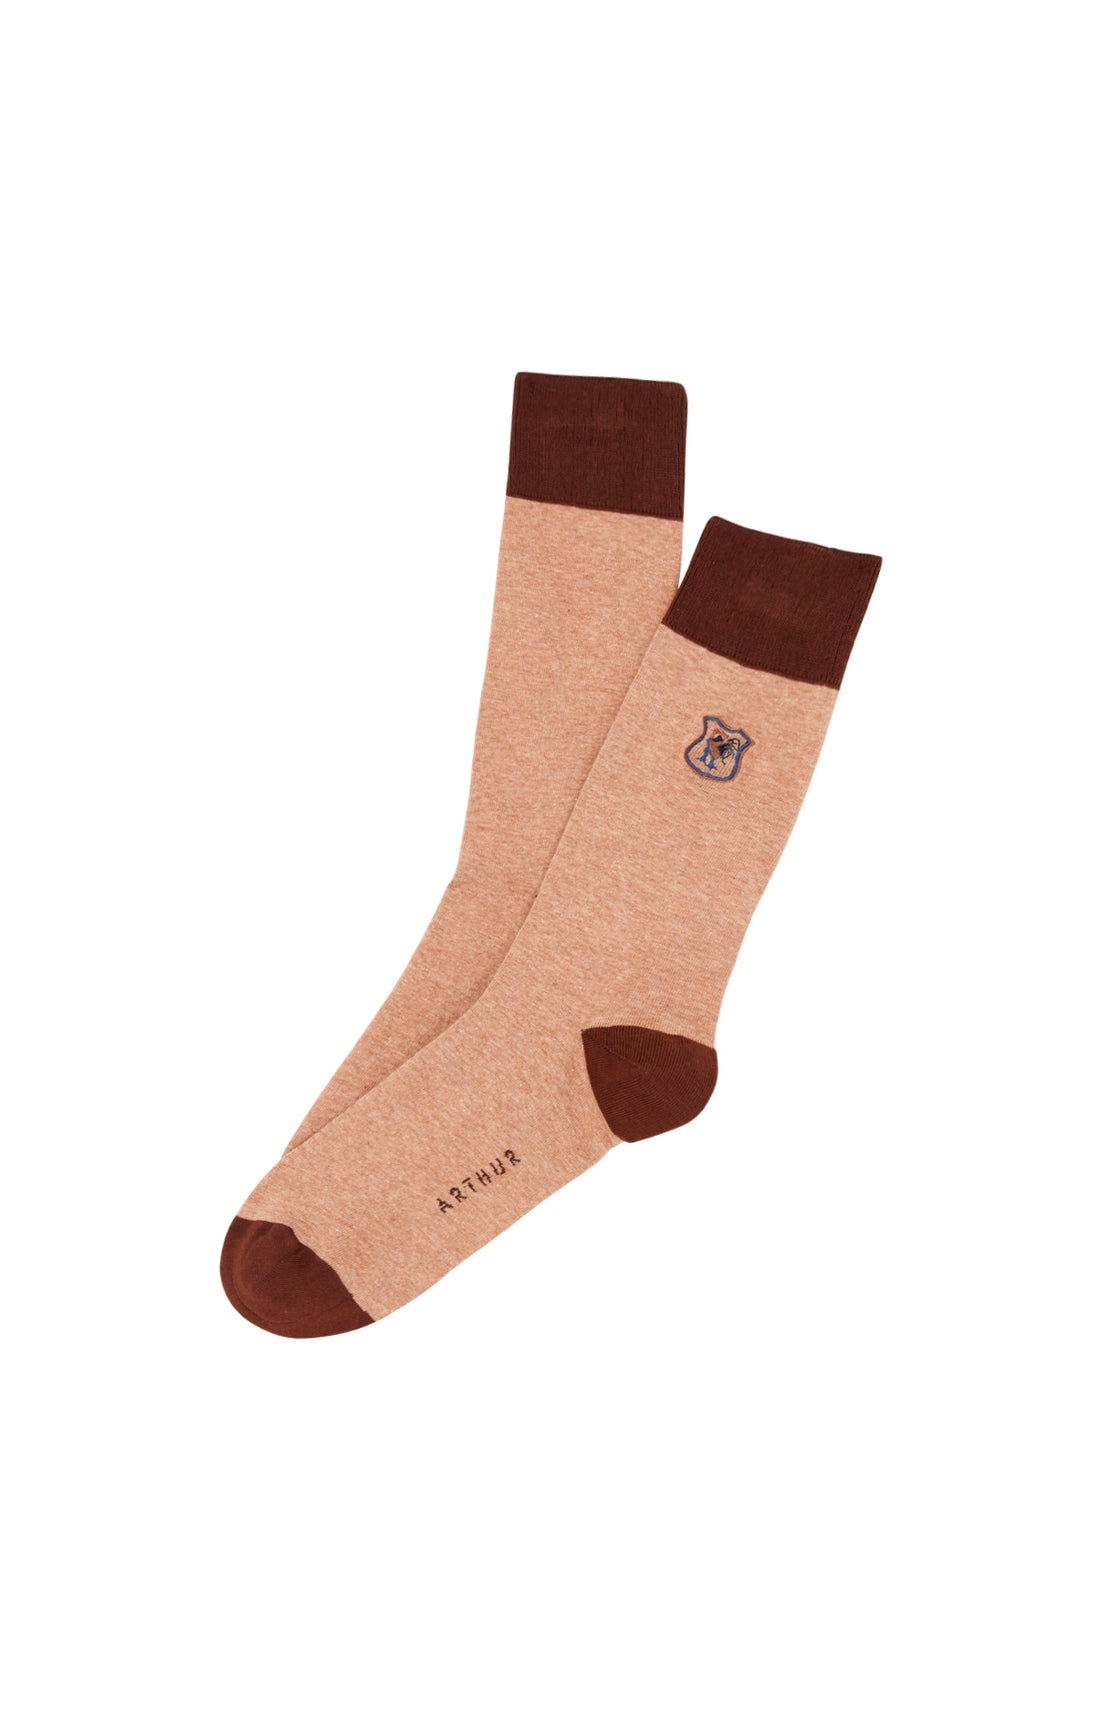 Embroidered socks - Rugby